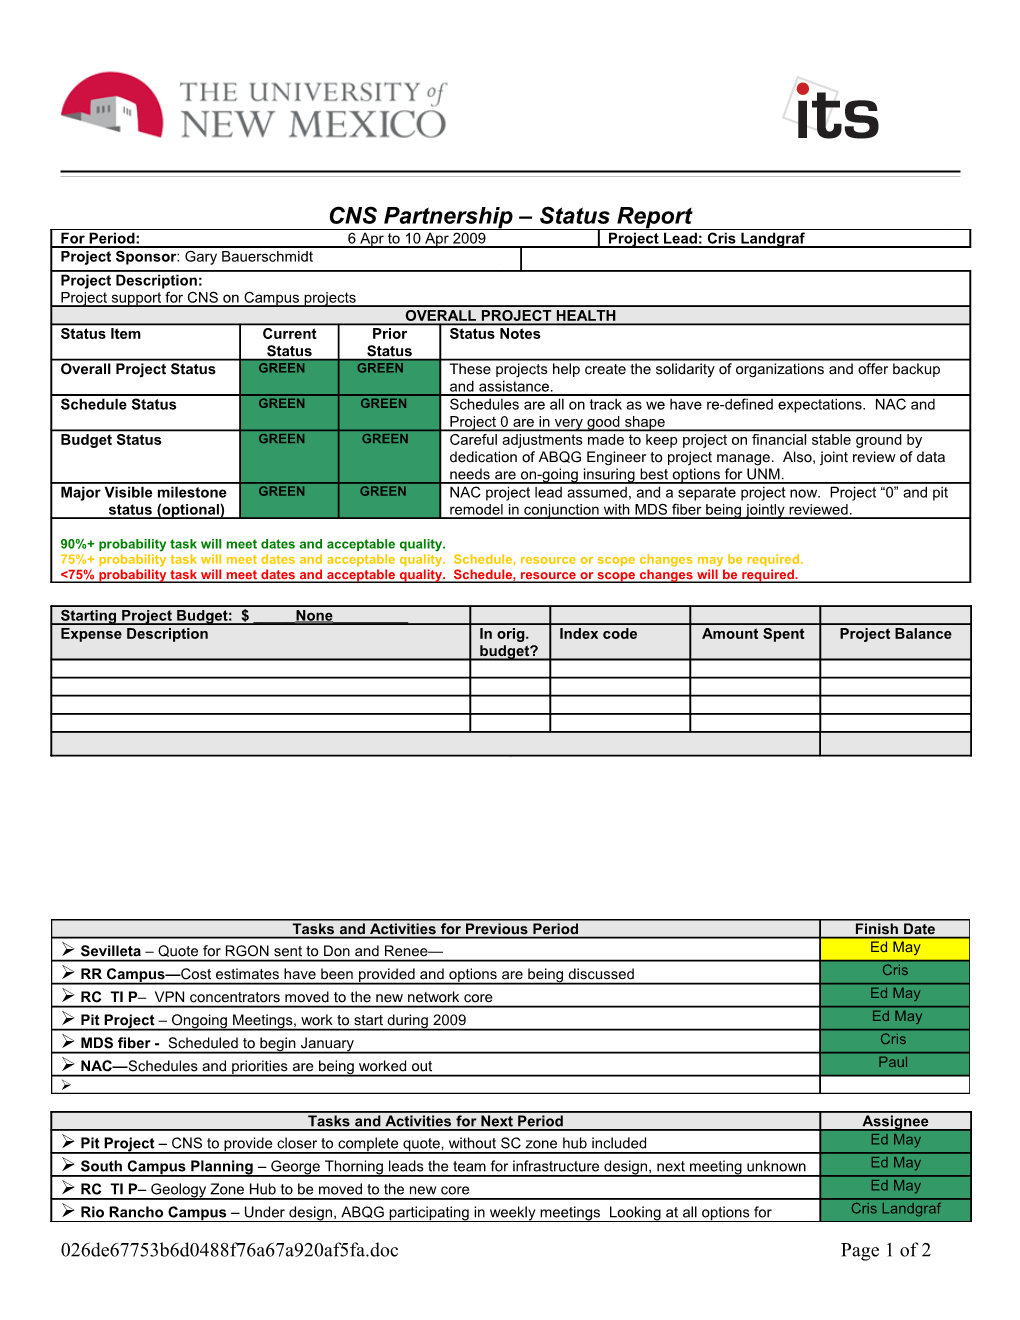 ITS Status Report Template s2